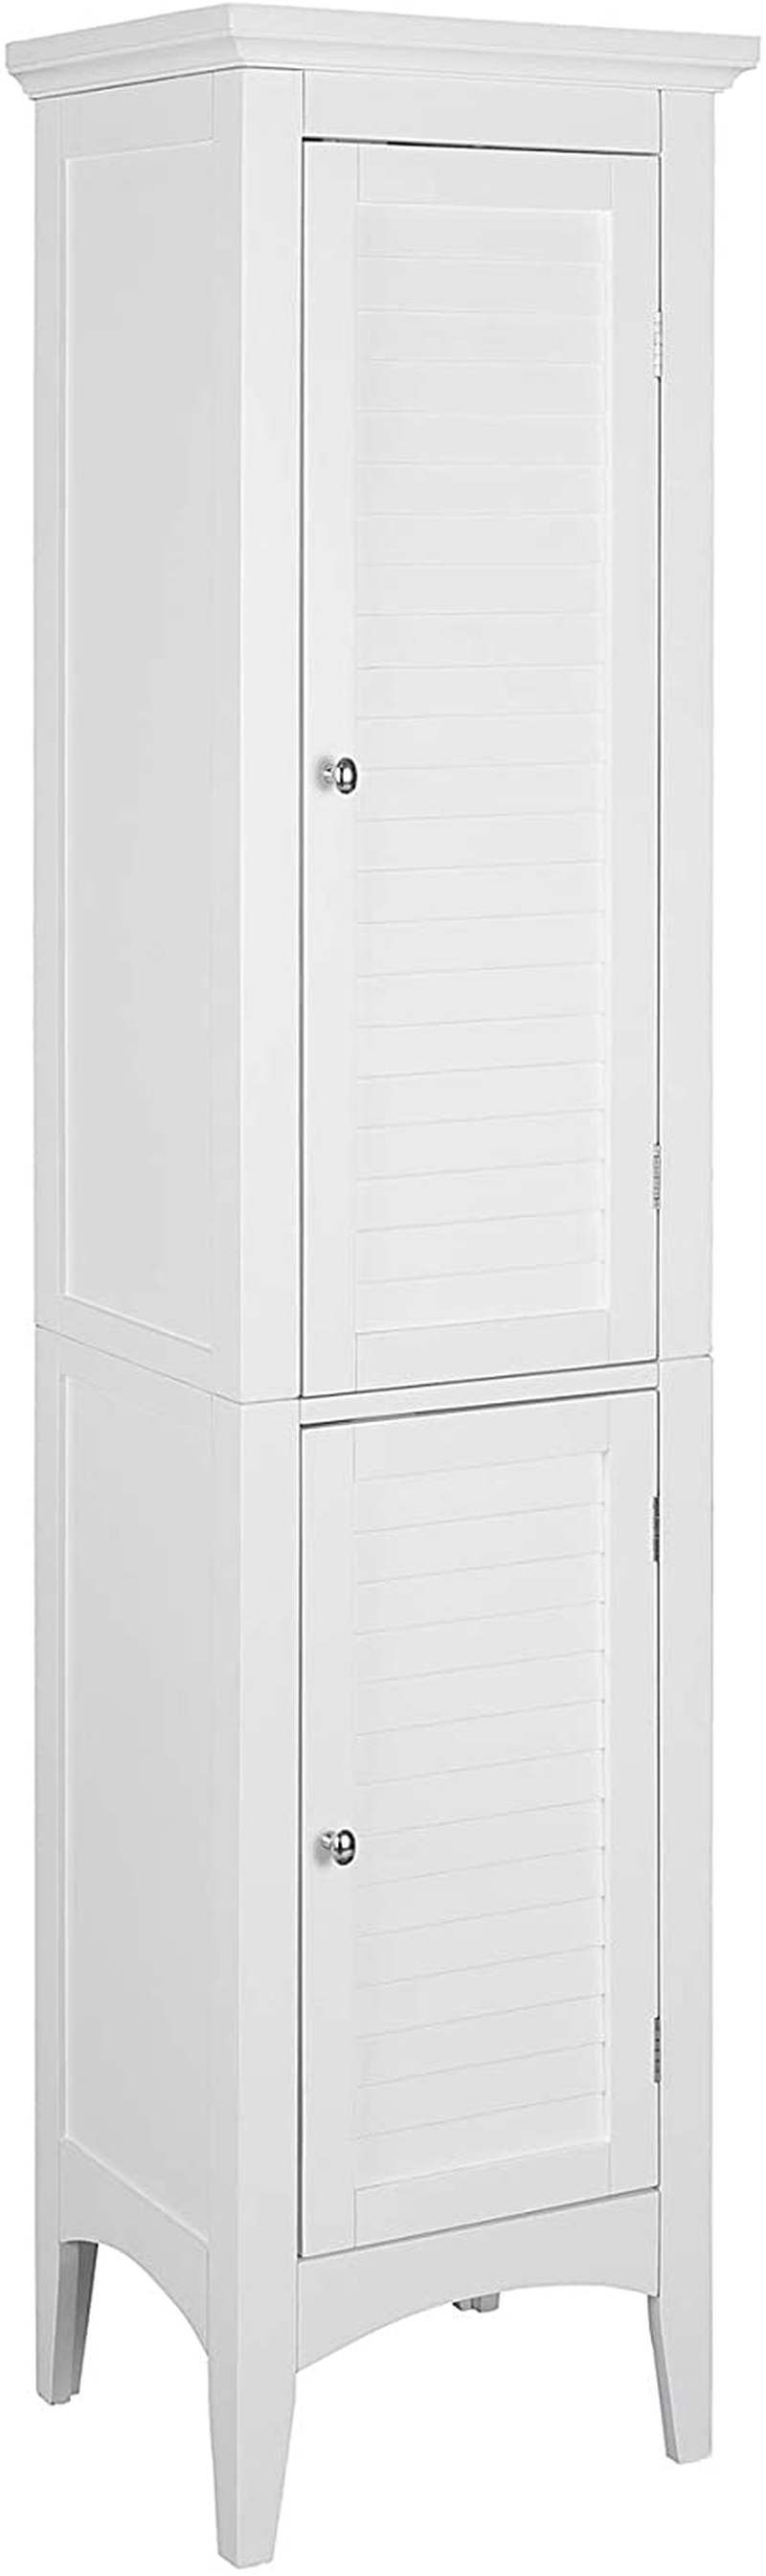 Elegant Home Fashions Glancy Linen Tower Freestanding Cabinet Tall Narrow Bathroom Kitchen Living Room Storage with 2 Shutter Doors 5 Tier Shelves, White